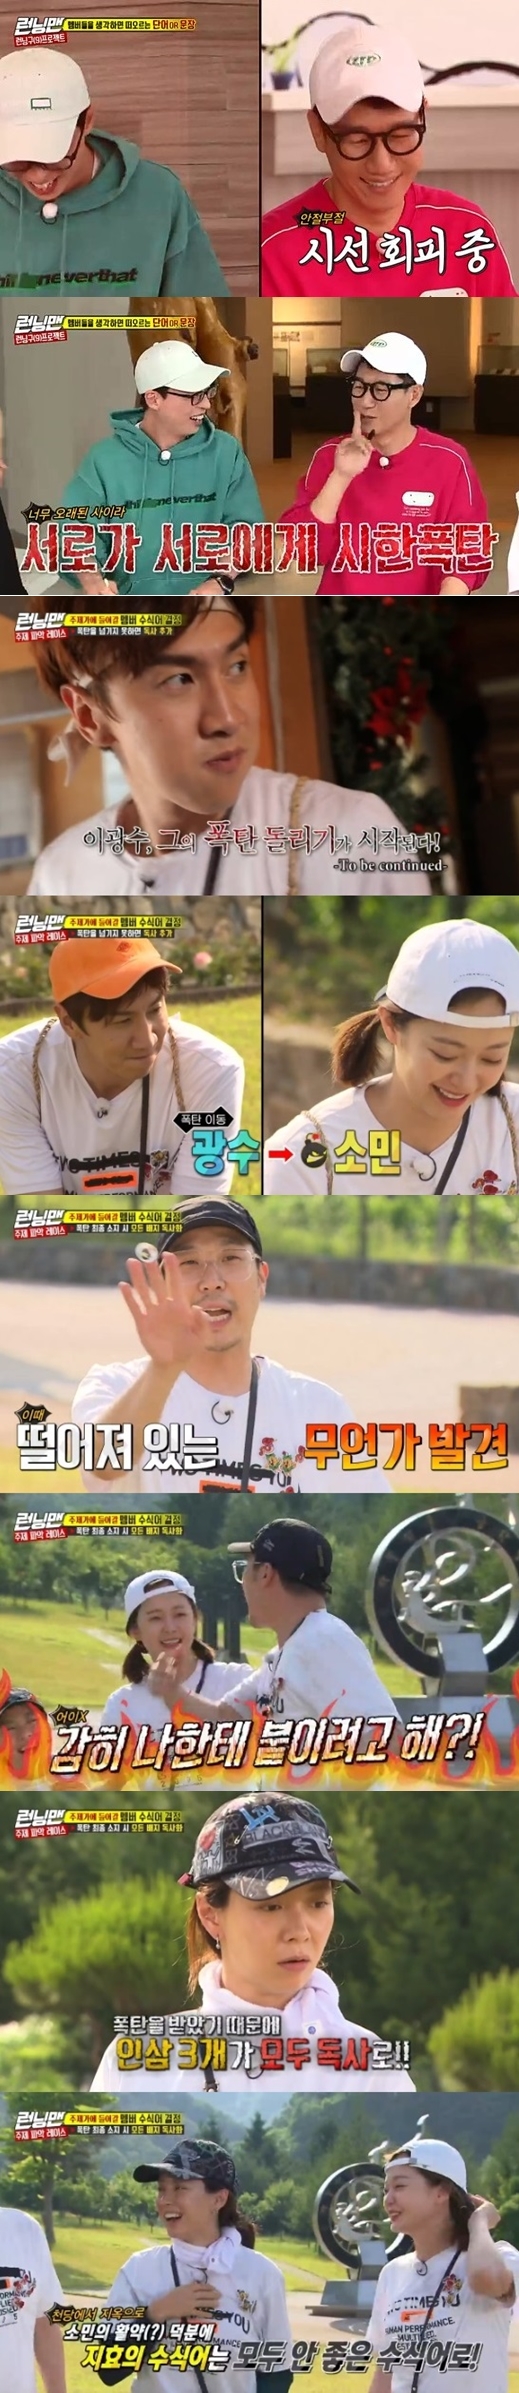 Running Man Jeon So-mins bomb-turning won the highest audience rating.According to Nielsen Korea, the ratings agency, SBS Running Man, which was broadcast on June 16, soared to 8.4% of the highest audience rating per minute, and the 2049 target audience rating, an important indicator of major advertising officials, recorded 3.8% (based on the second part of the audience rating of households in the Seoul Capital Area), ranking first in the same time zone, surpassing Masked Wang and Donkey Ears.The average audience rating was 5.2% in the first part and 6.8% in the second part (based on the audience rating of households in the Seoul Capital Area).The broadcast was decorated with a theme-reading race for the theme song to be presented at the Fan Meeting this summer.The members had to set the number of good modifiers ( Ginseng badges) and bad modifiers (poison badges) of the theme song while they decided to participate in the songwriting of the theme song themselves, and had to move to the bomb within an hour of the bomb because there was a bomb.Because there is a time limit for bombs, if you pass that time, you will get a viper badge. Even if you take it, you will get another viper badge.Among them, Jeon So-min showed off the like a poison that led to the reversal, shook the plate of the race, and noticed that he had a bomb late on the last mission.The scene soared to 8.4% of the audience rating per minute, accounting for the best one minute.So, Jeon So-min showed boldness of handing over his bomb to Song Ji-ryu, and Song Ji-hyo, who ran Race 1st pRace, had to watch his ginseng badge turned into a poison badge at the last minute.Yoo Jae-Suk took the first pRace in the race with Fisherman Jiri, and Yoo Jae-Suk chose a modifier to enter the theme song based on the badge of each member.Park Su-in